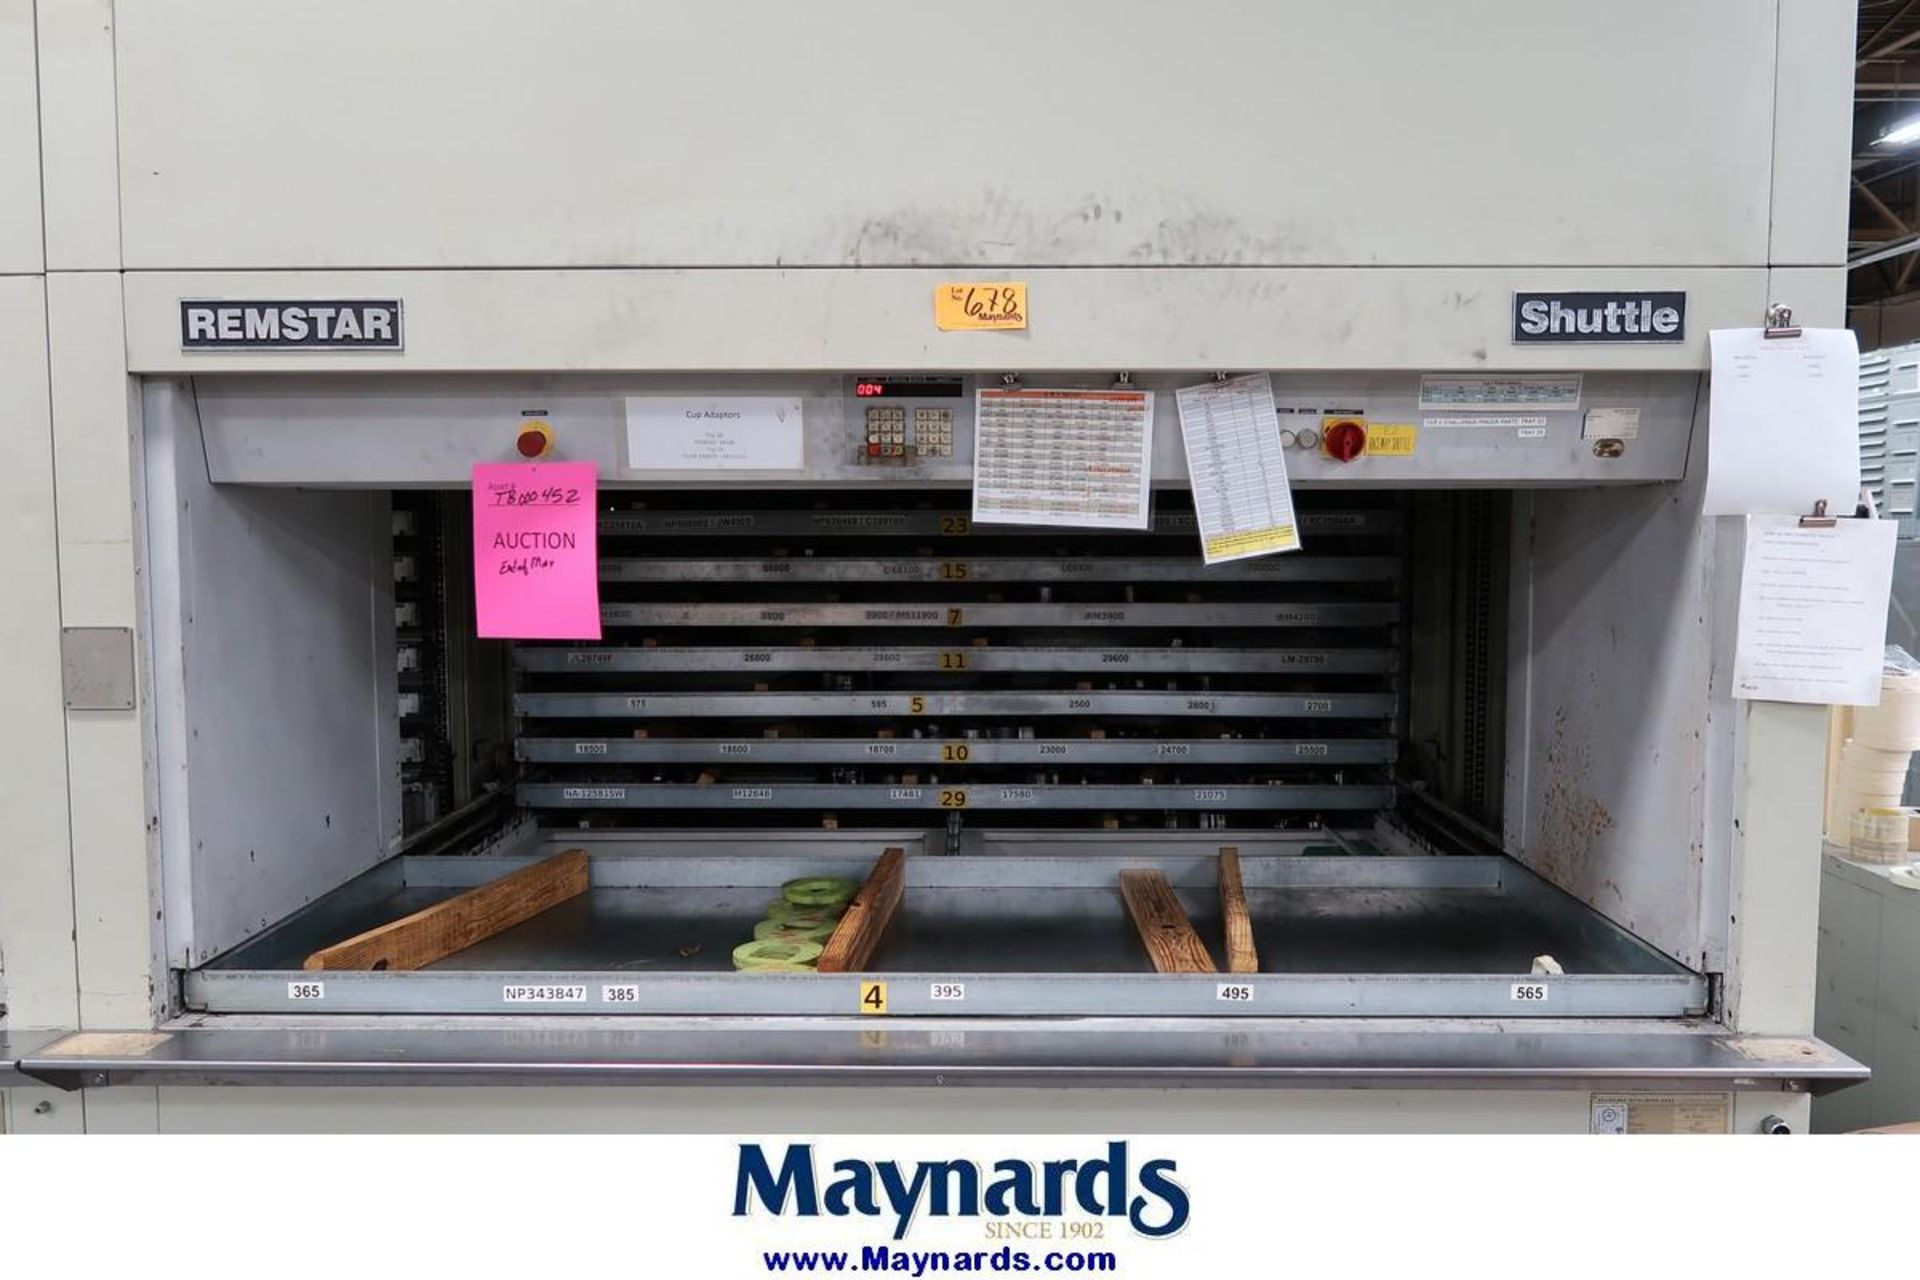 1997 Remstar Shuttle 2350x825 Vertical Lift Parts Shuttle Cabinet - Image 2 of 5